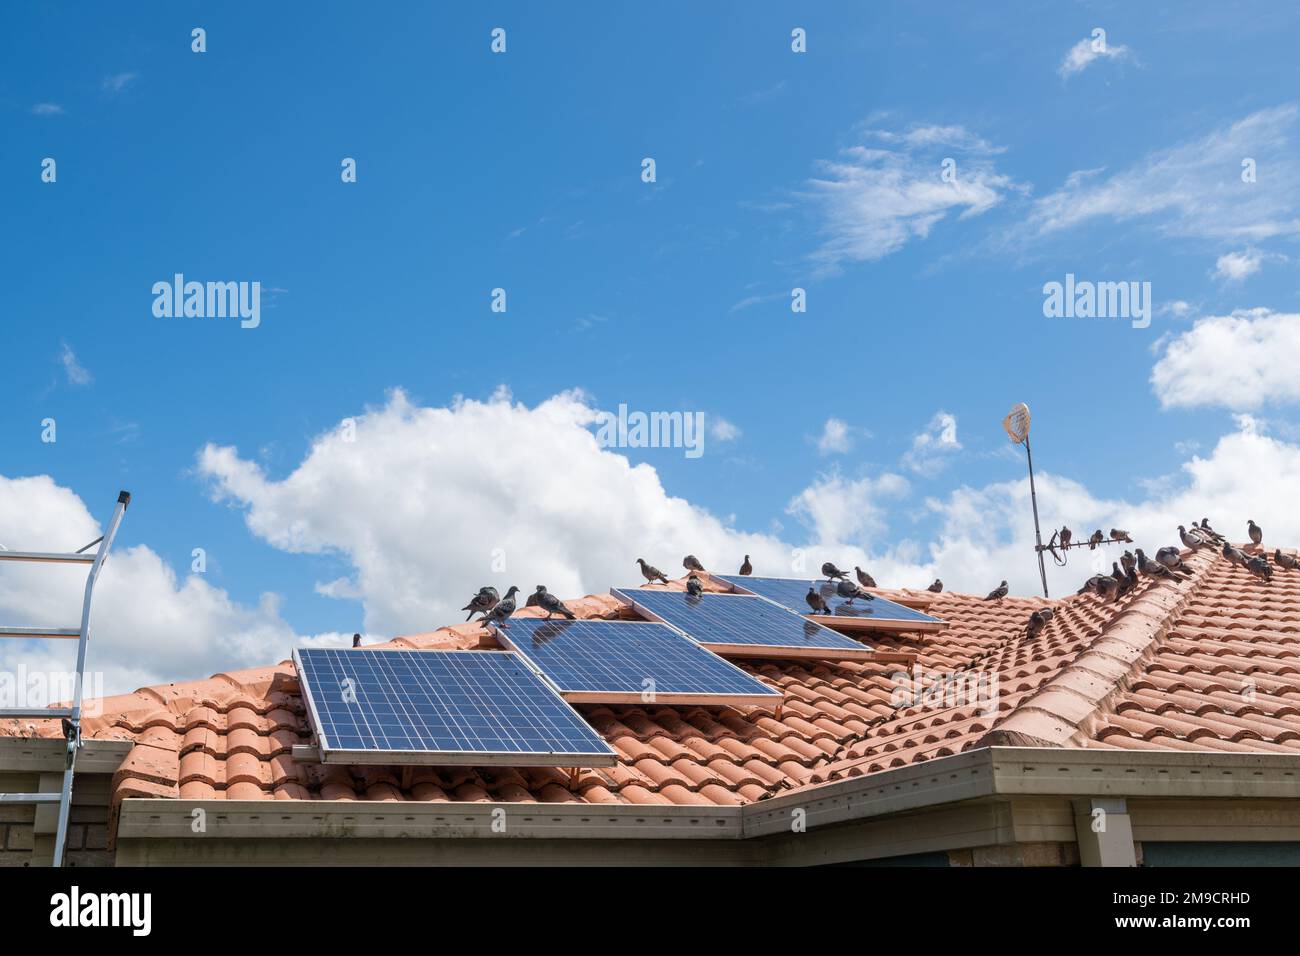 Solar panels on the roof of a house covered with pigeon droppings and roosting pigeons Stock Photo